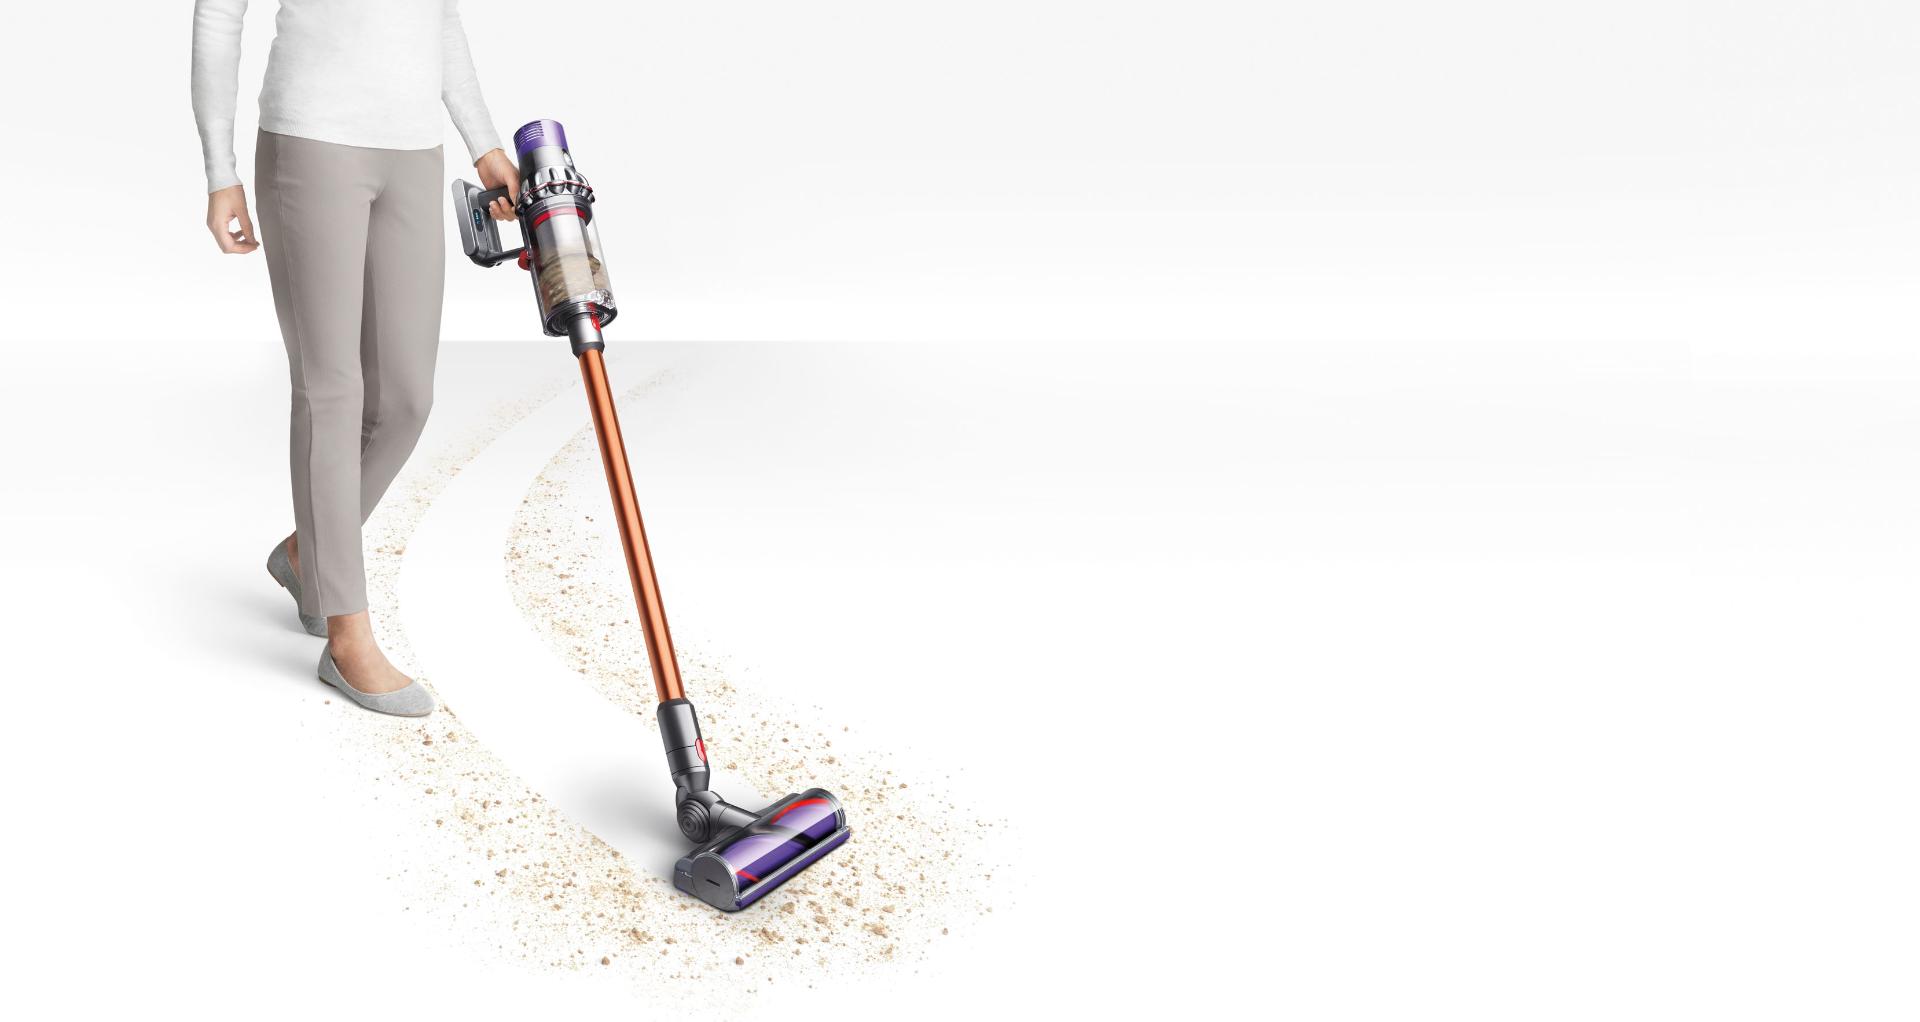 Dyson Cyclone V10™ vacuum cleaner on white floor